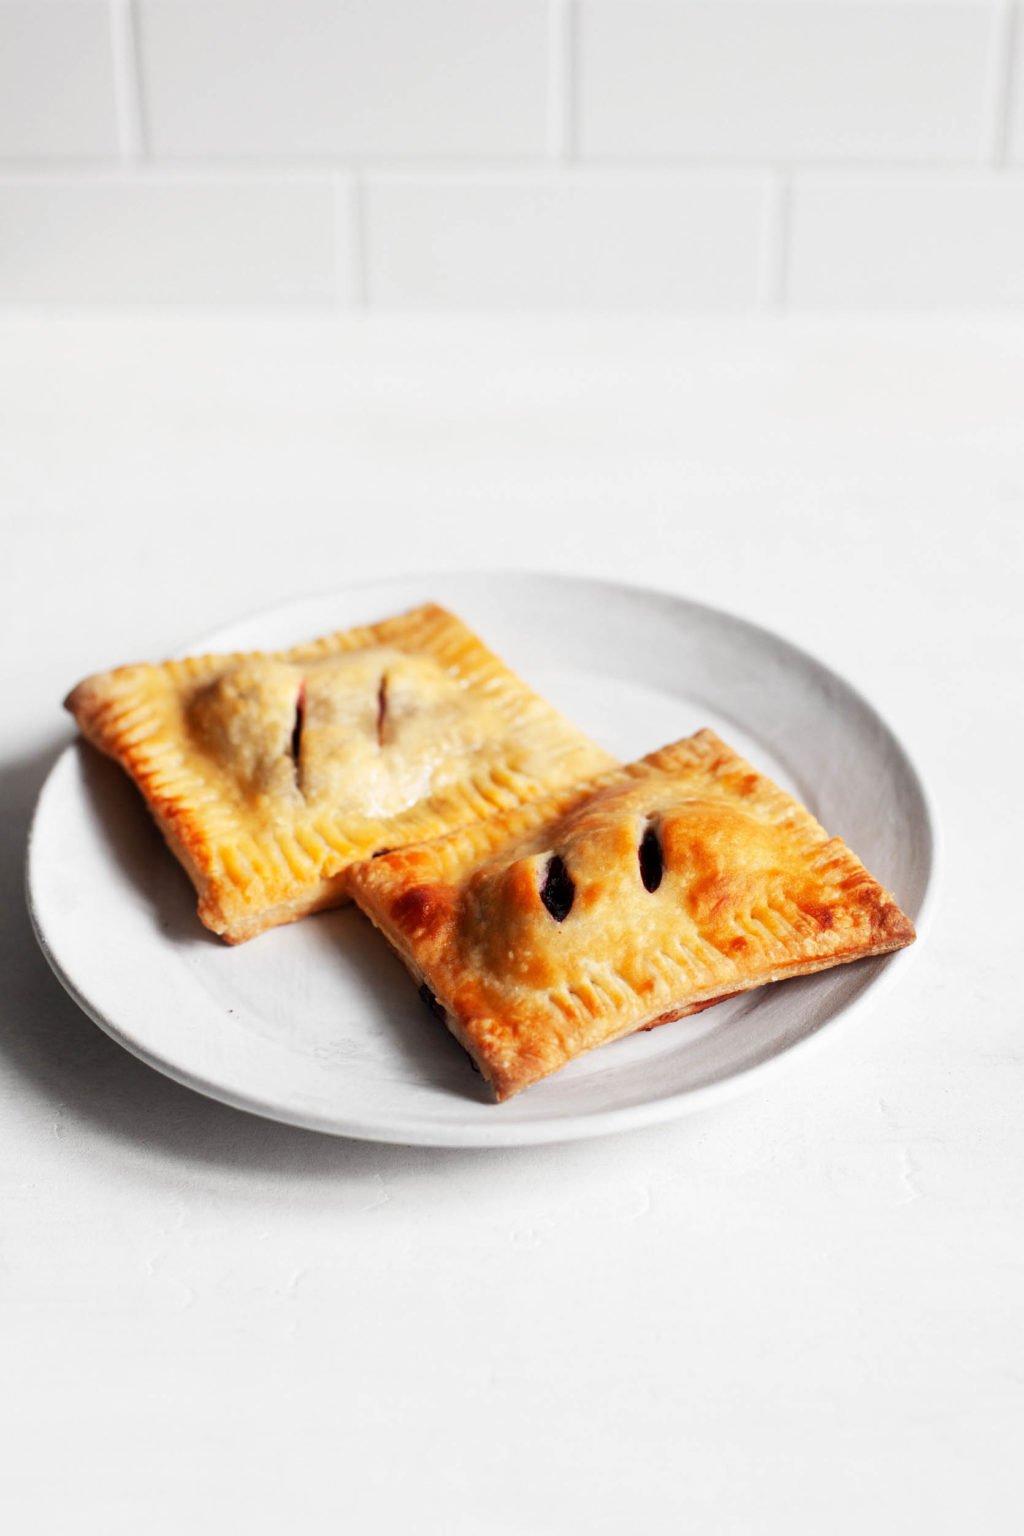 Two rectangular, vegan cherry hand pies with crispy golden pastry sit next to each other on a dessert serving plate.